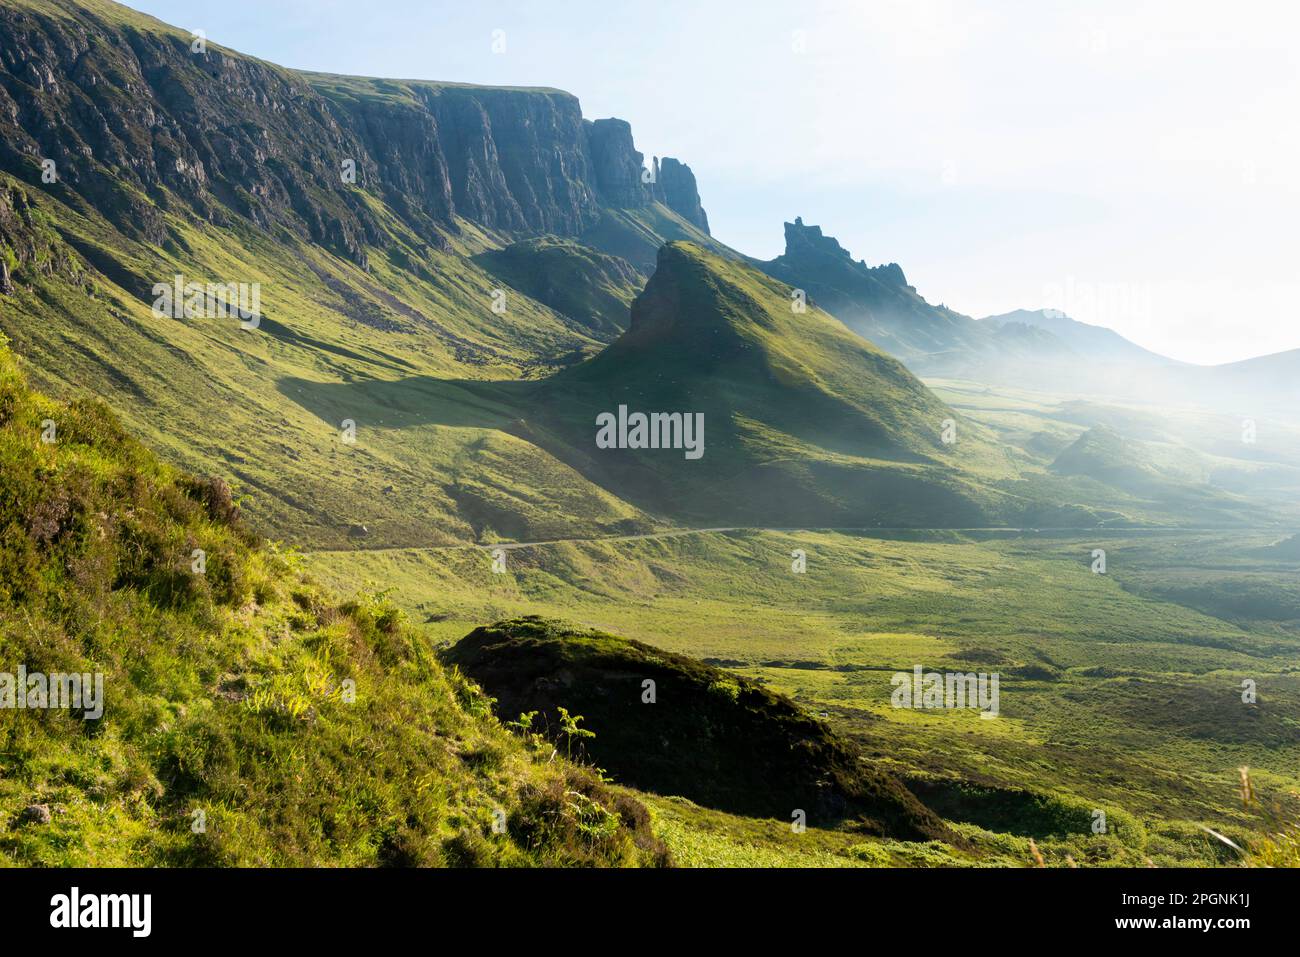 The Quiraing landslip on the eastern face of Skye, the northernmost summit of the Trotternish Ridge Stock Photo